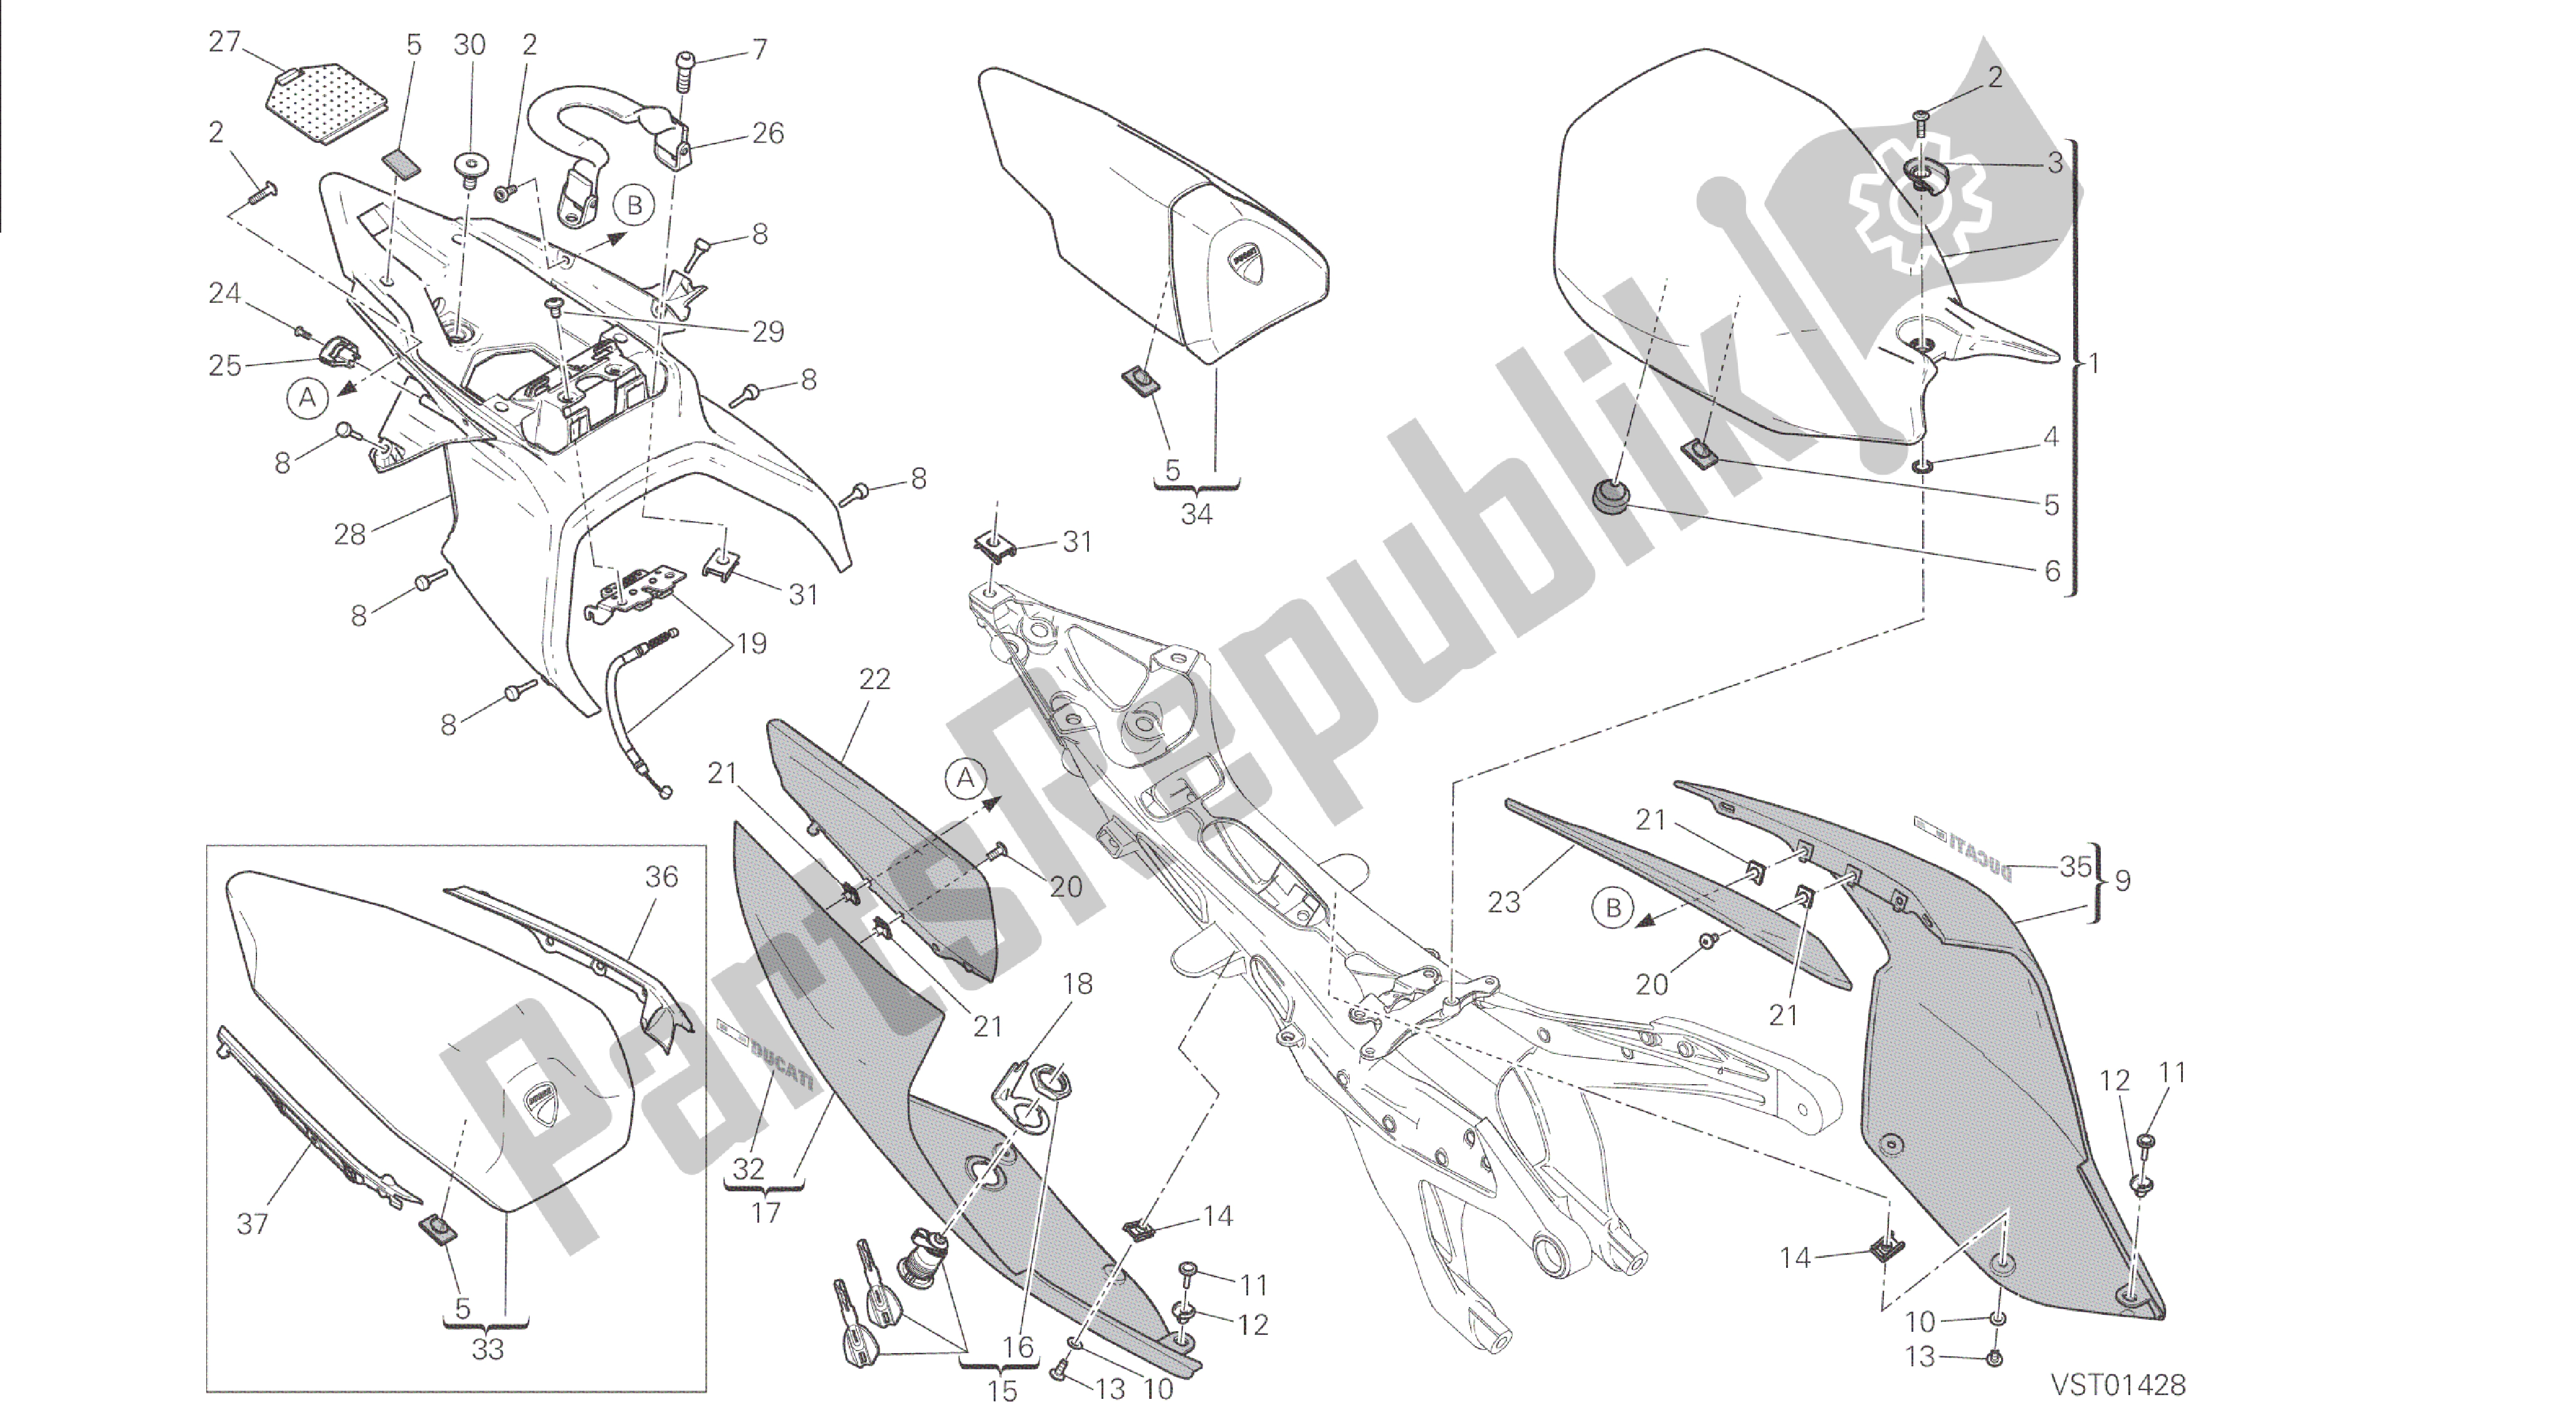 All parts for the Drawing 033 - Seat [mod:1299;xst:aus,eur,fra,jap,twn]group Frame of the Ducati Panigale 1299 2015